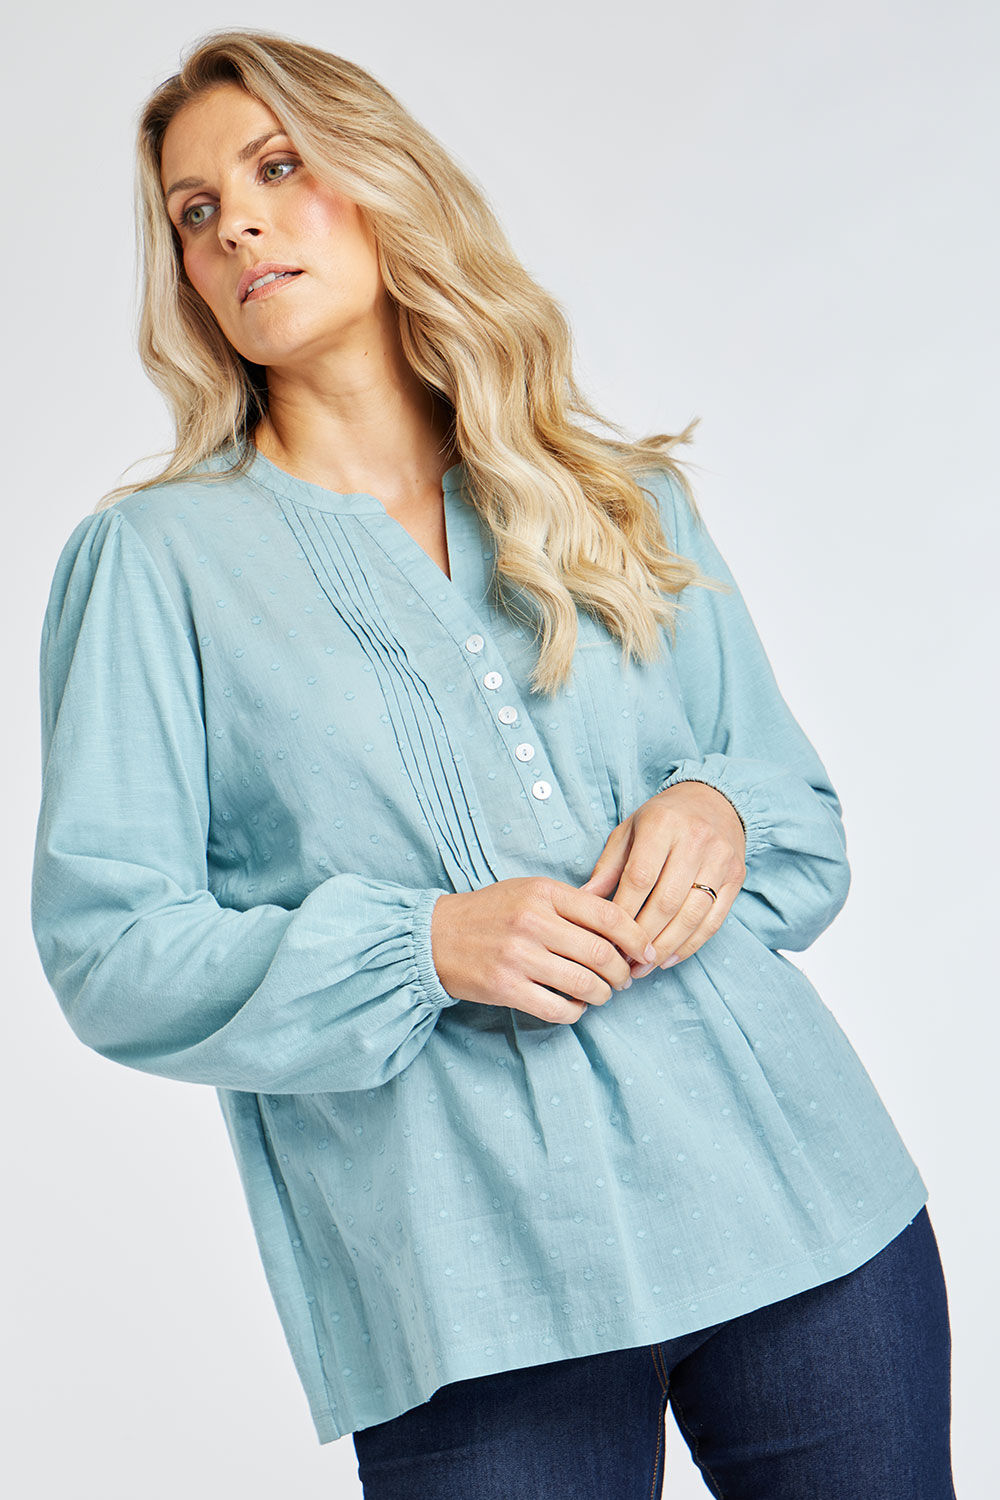 Bonmarche Women’s Blue Cotton Dobby Woven 3/4 Sleeve Front Style Pintuck Blouse, Size: 10